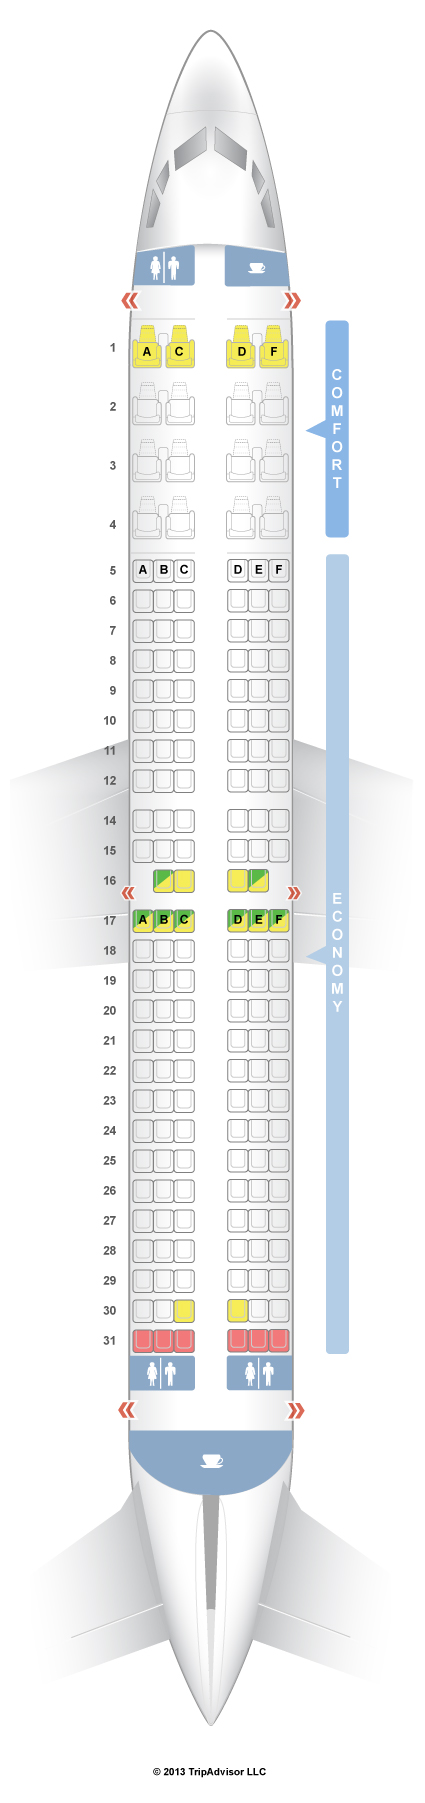 Seating Chart For American Airlines Boeing 737 800